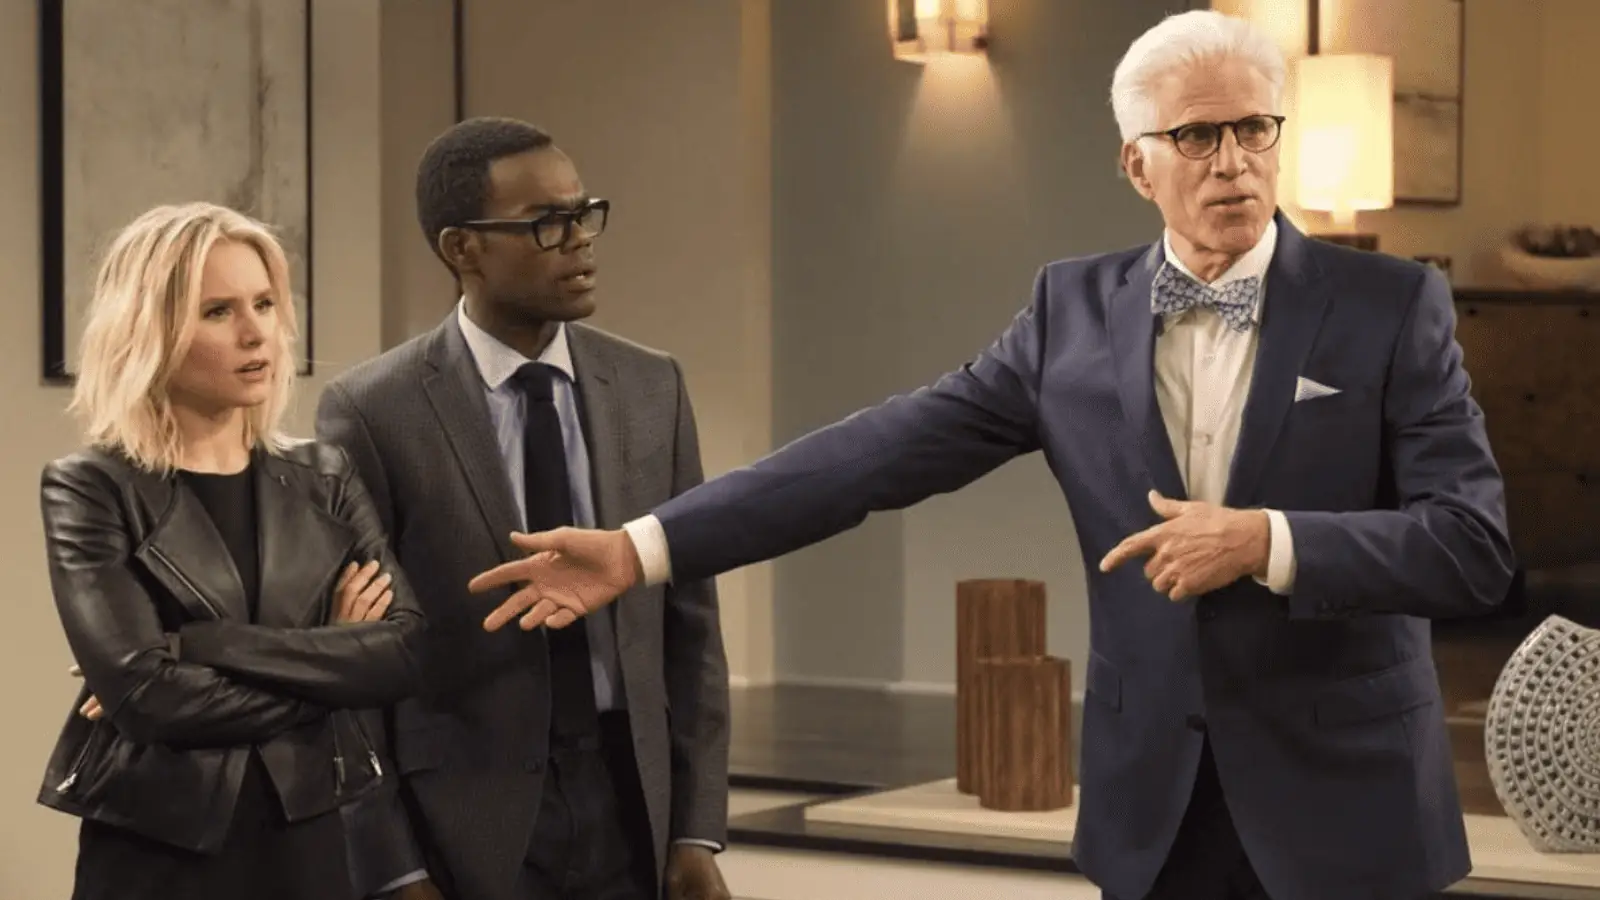 Scene from The Good Place